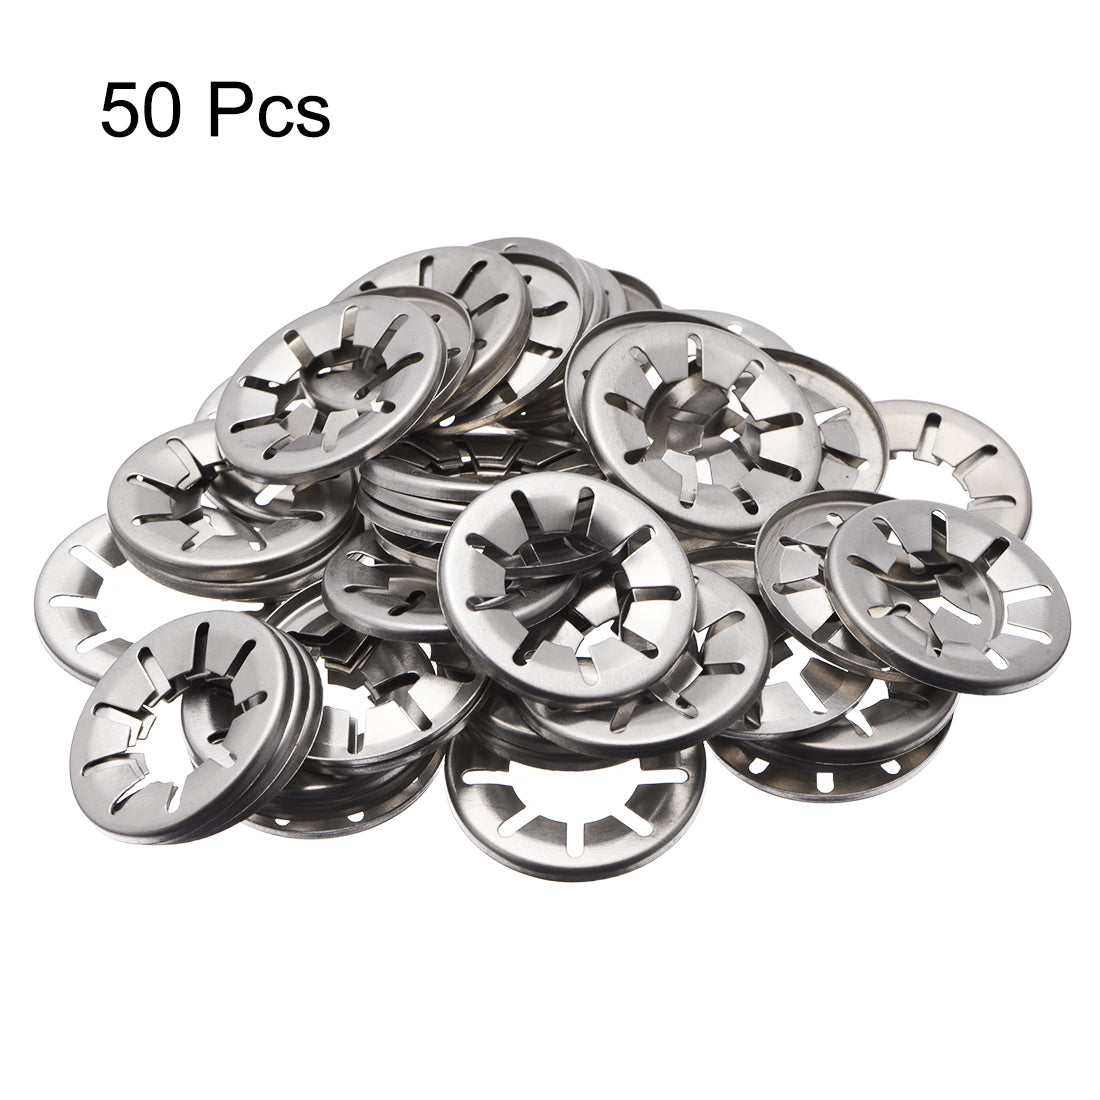 Uxcell Uxcell Star Locking Washers M16 x 28 Internal Tooth Push On Locking Washers Clips Fasteners Assortment Kit Silver Tone 50 pcs